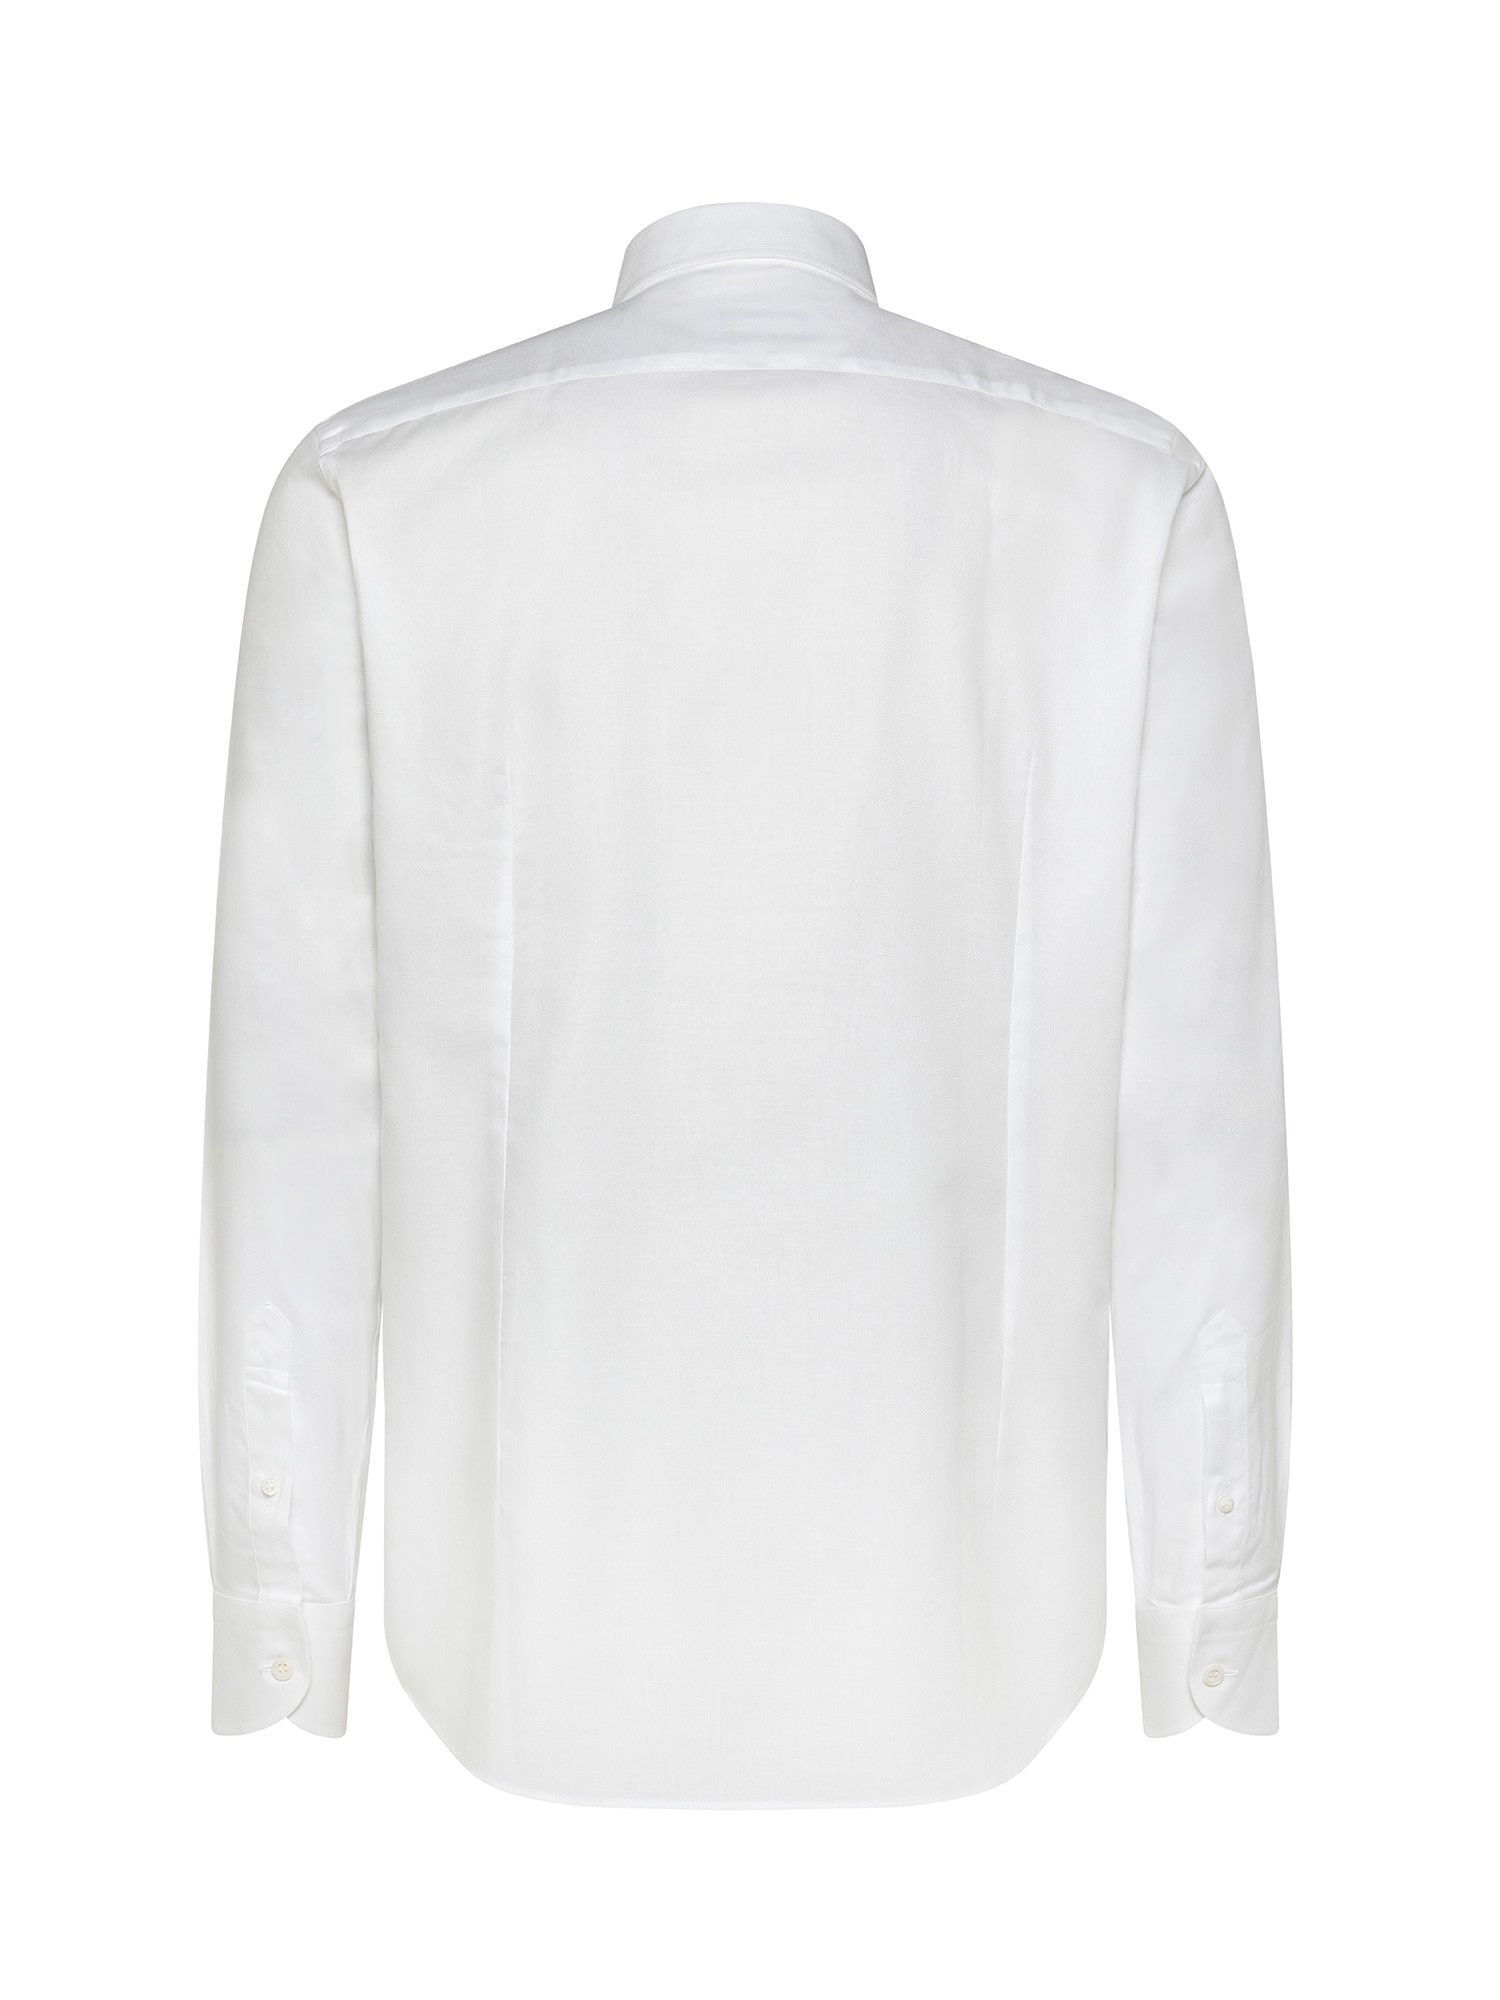 Slim fit shirt in pure cotton, White Cream, large image number 2